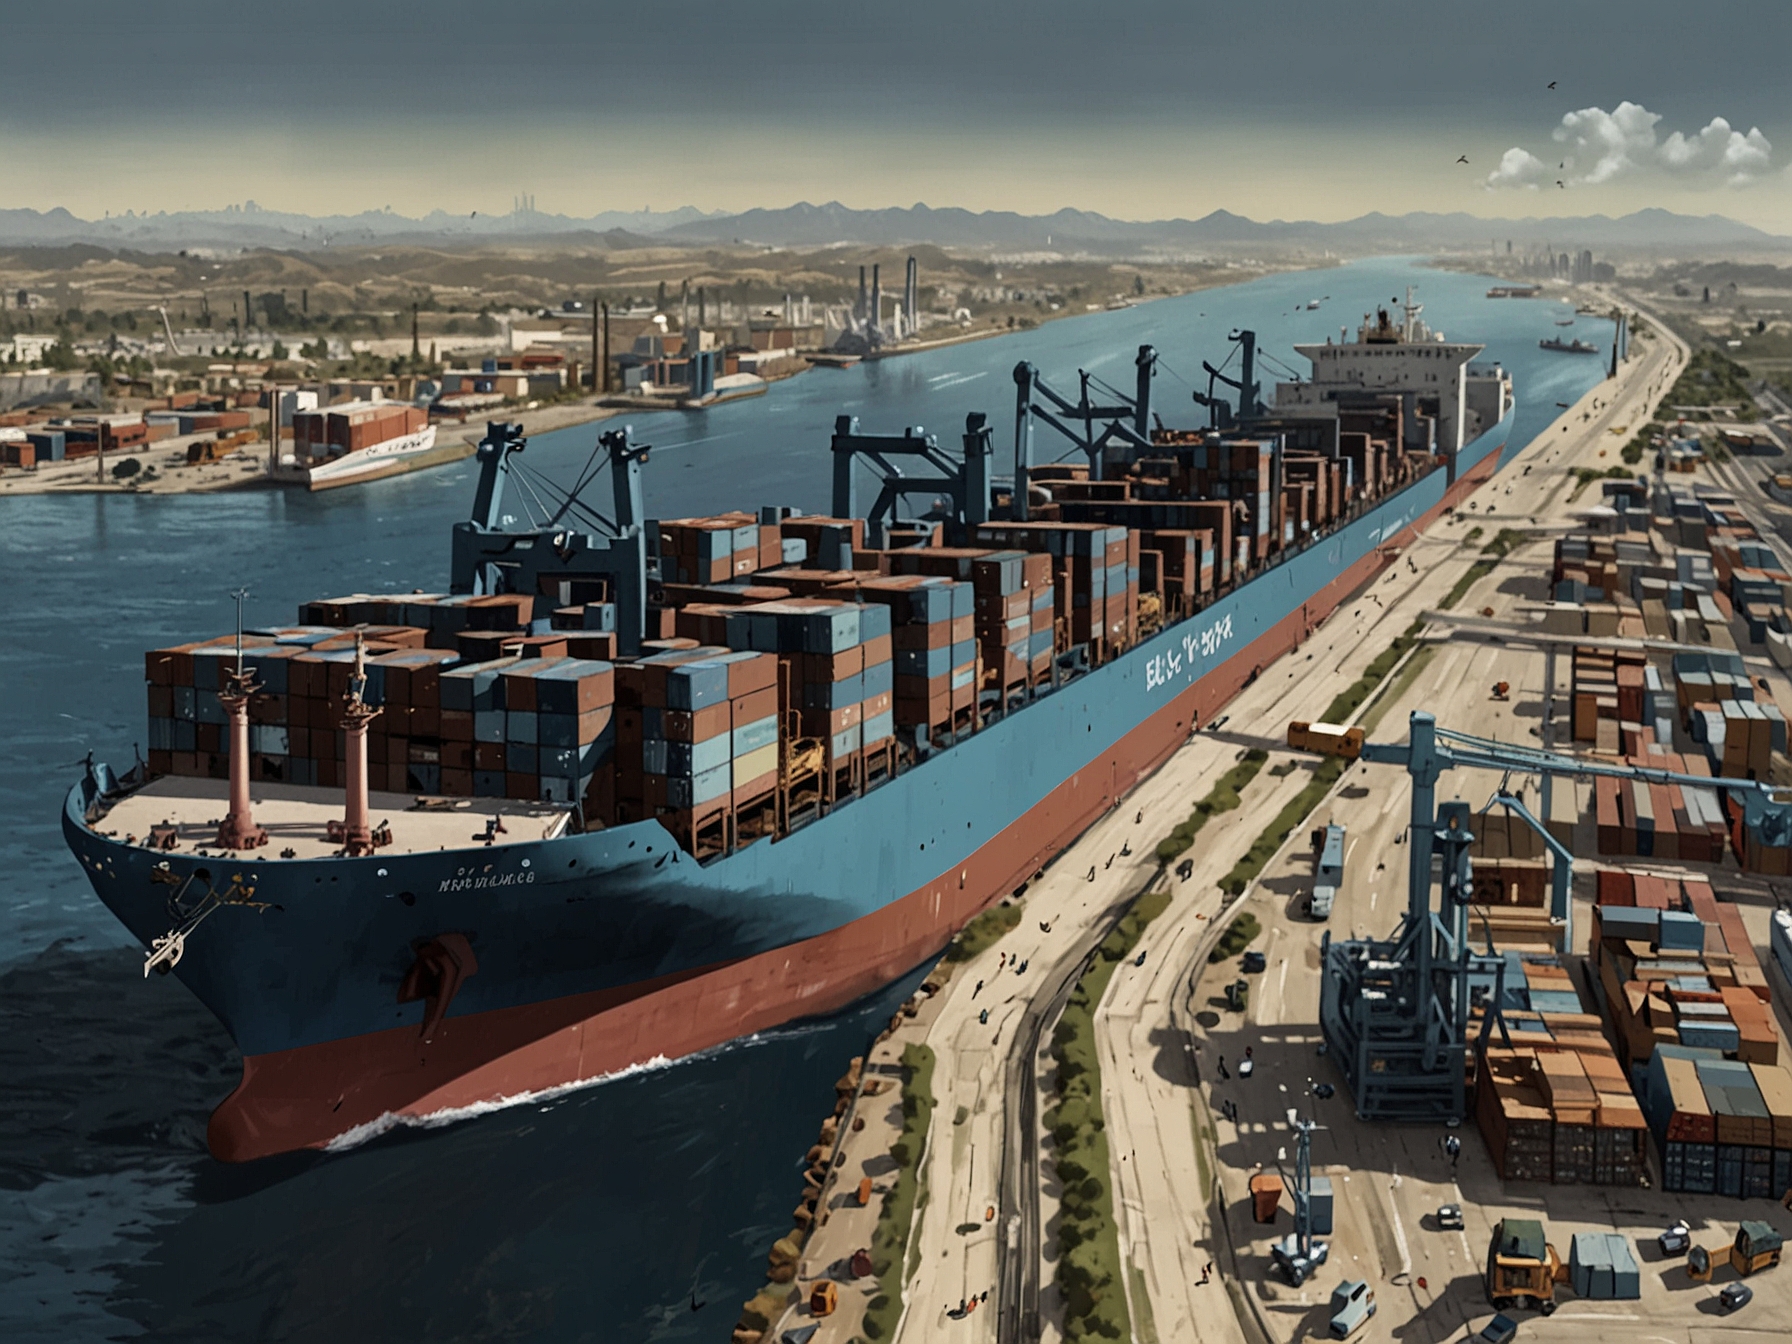 Rexford Industrial's strategic properties near Los Angeles and Long Beach ports, highlighting their key role in global commerce and efficient distribution networks across the U.S.